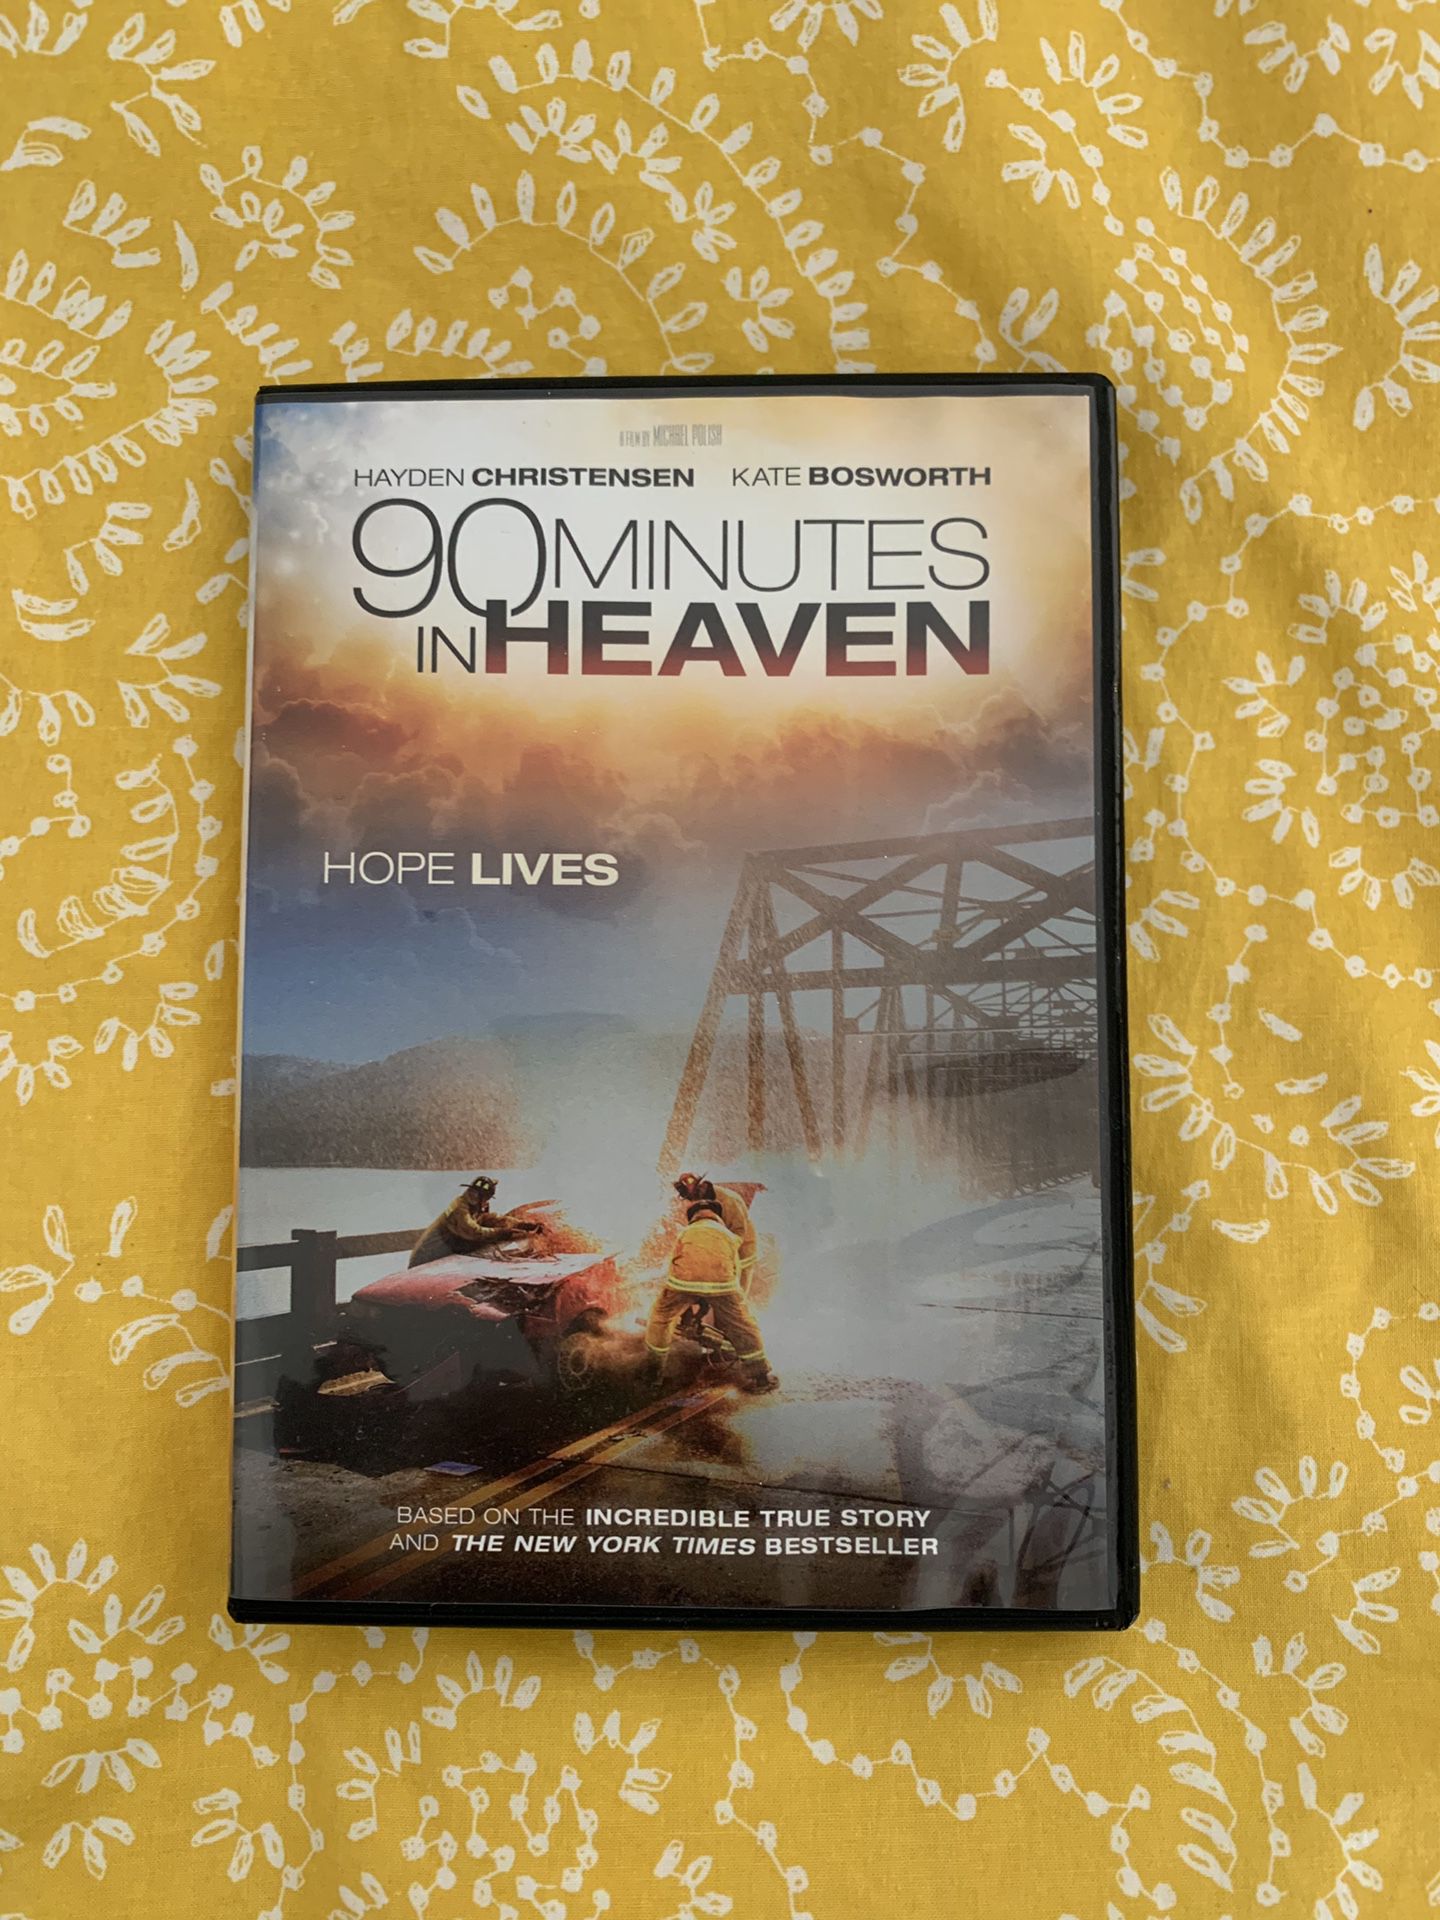 90 Minutes in HEAVEN. EXCELLENT Movie. Watch it then pass it on.